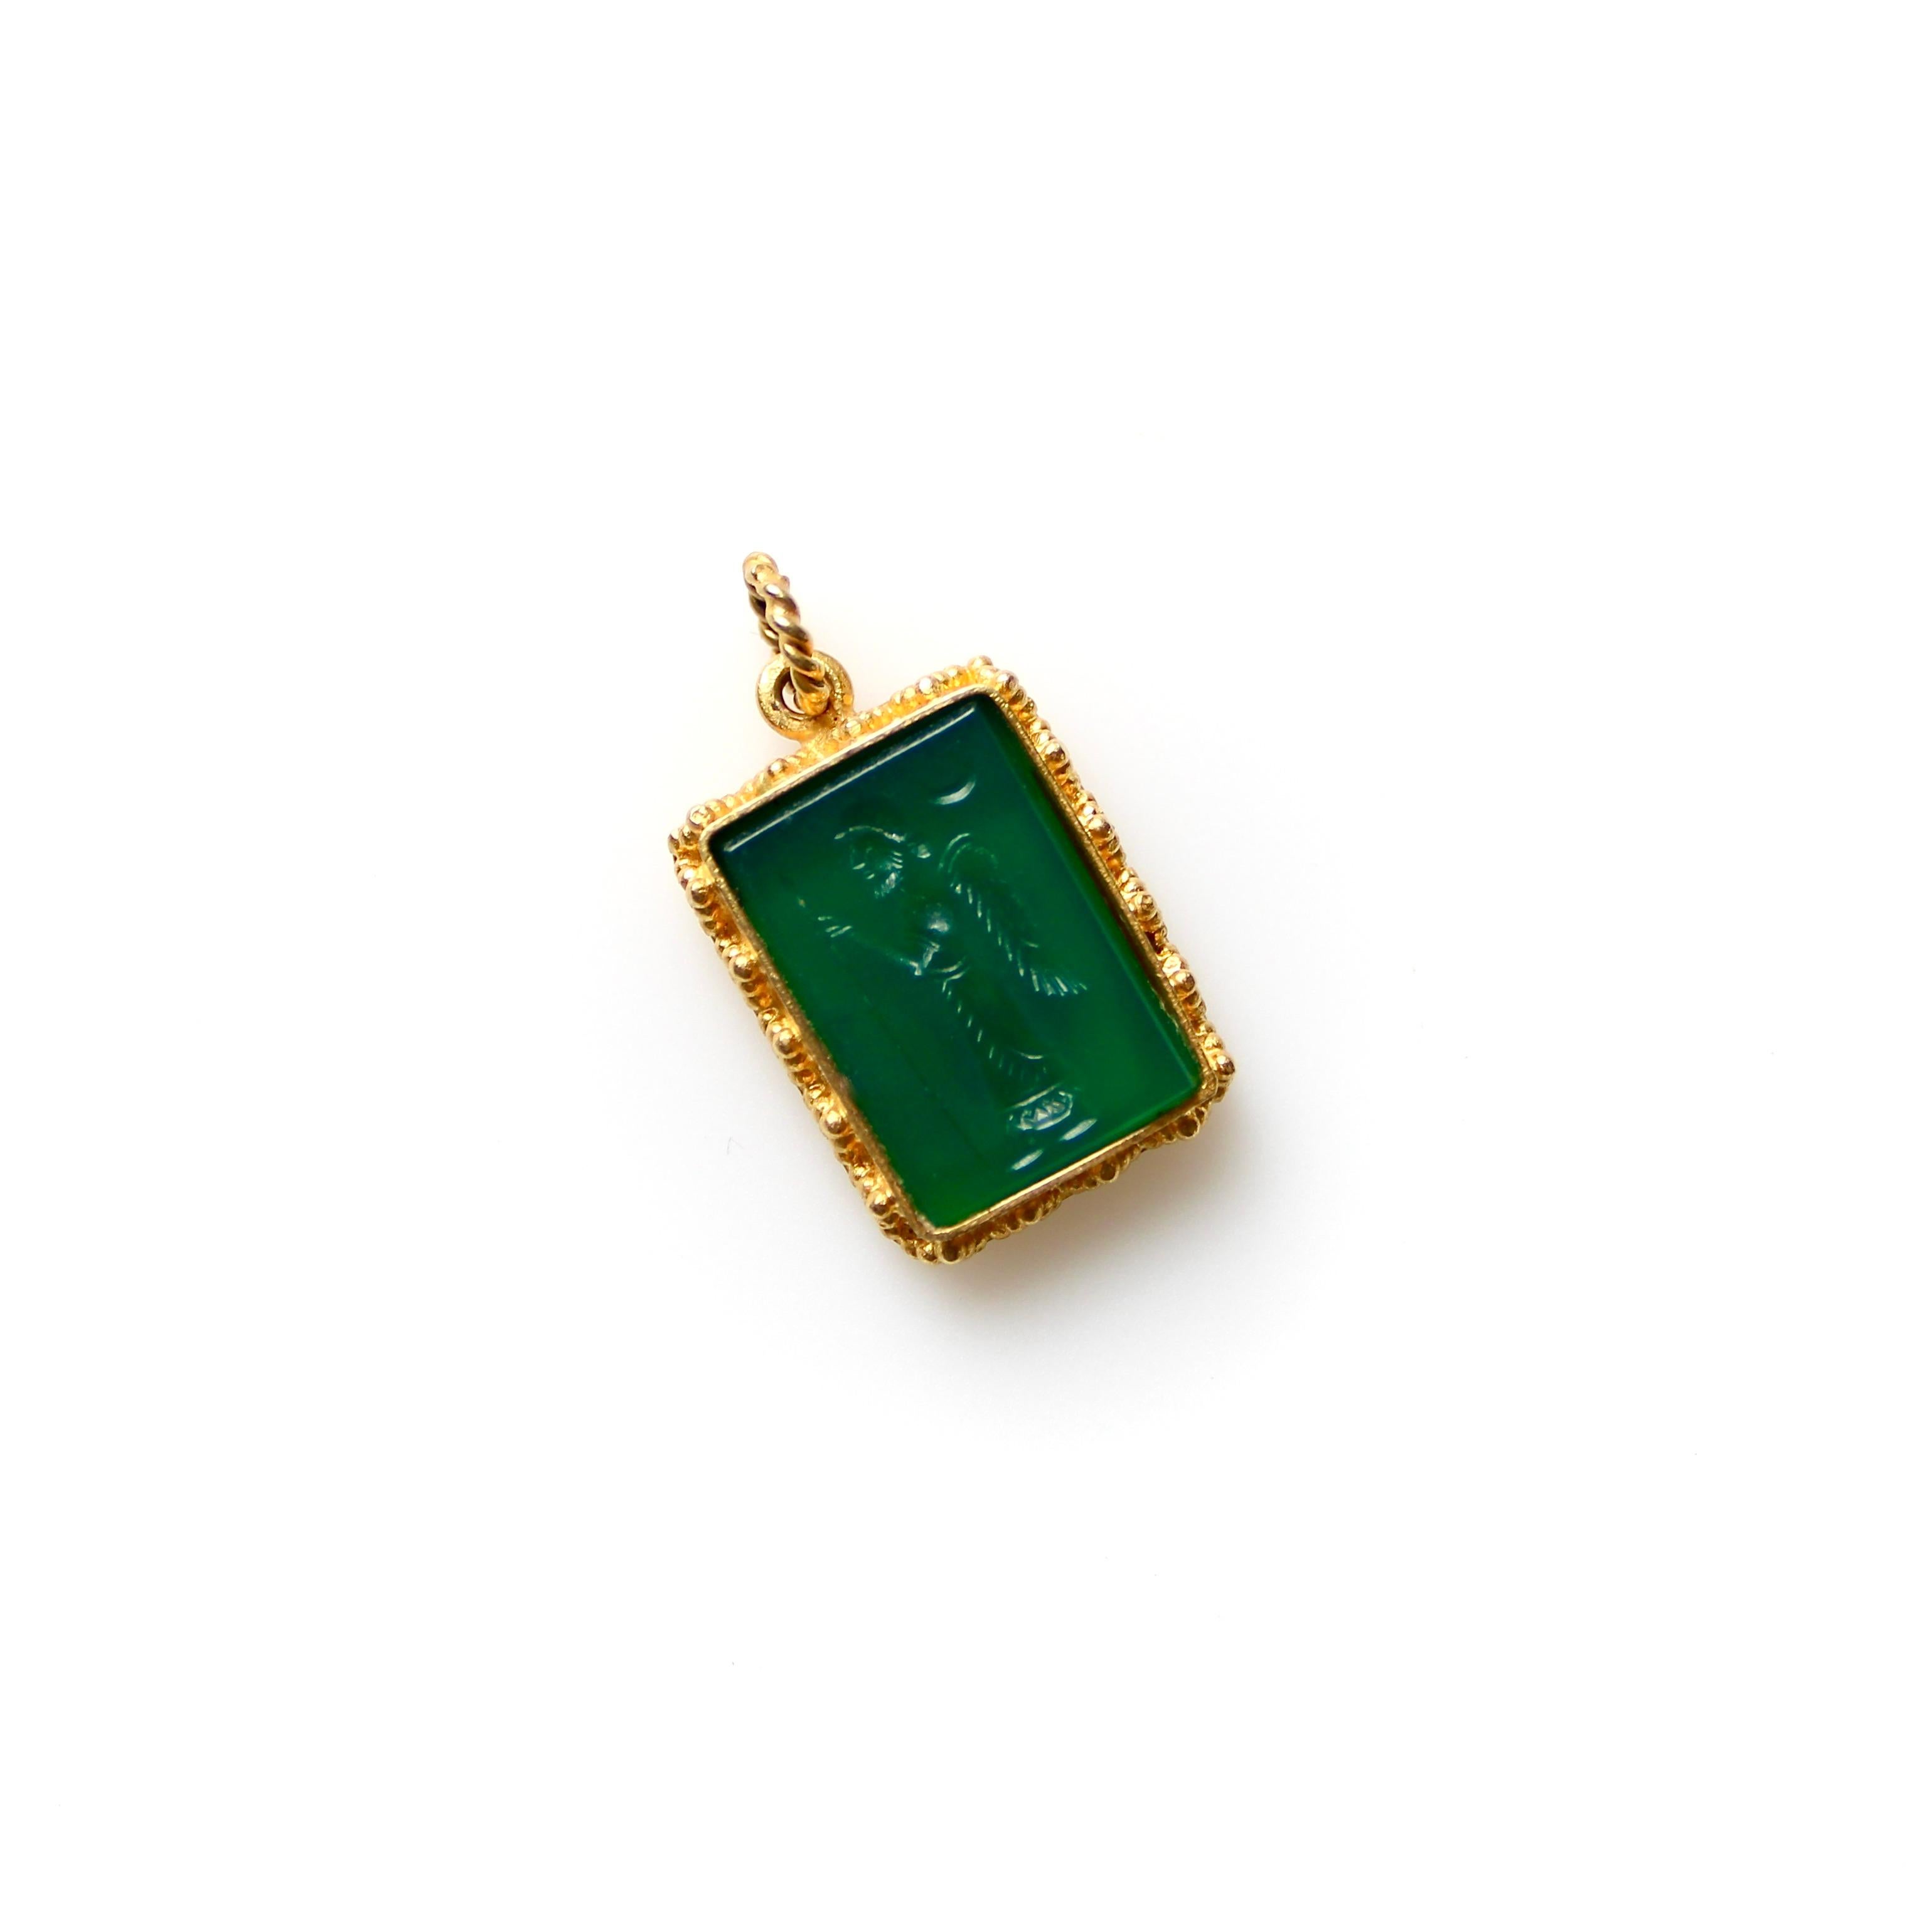 This 22k gold vintage pendant features a green chalcedony intaglio carved with the image Zoroaster. The gold has beautiful granulation in the style of Etruscan Revival, and the intaglio is bezel set into the pendant and presents itself as a tiny